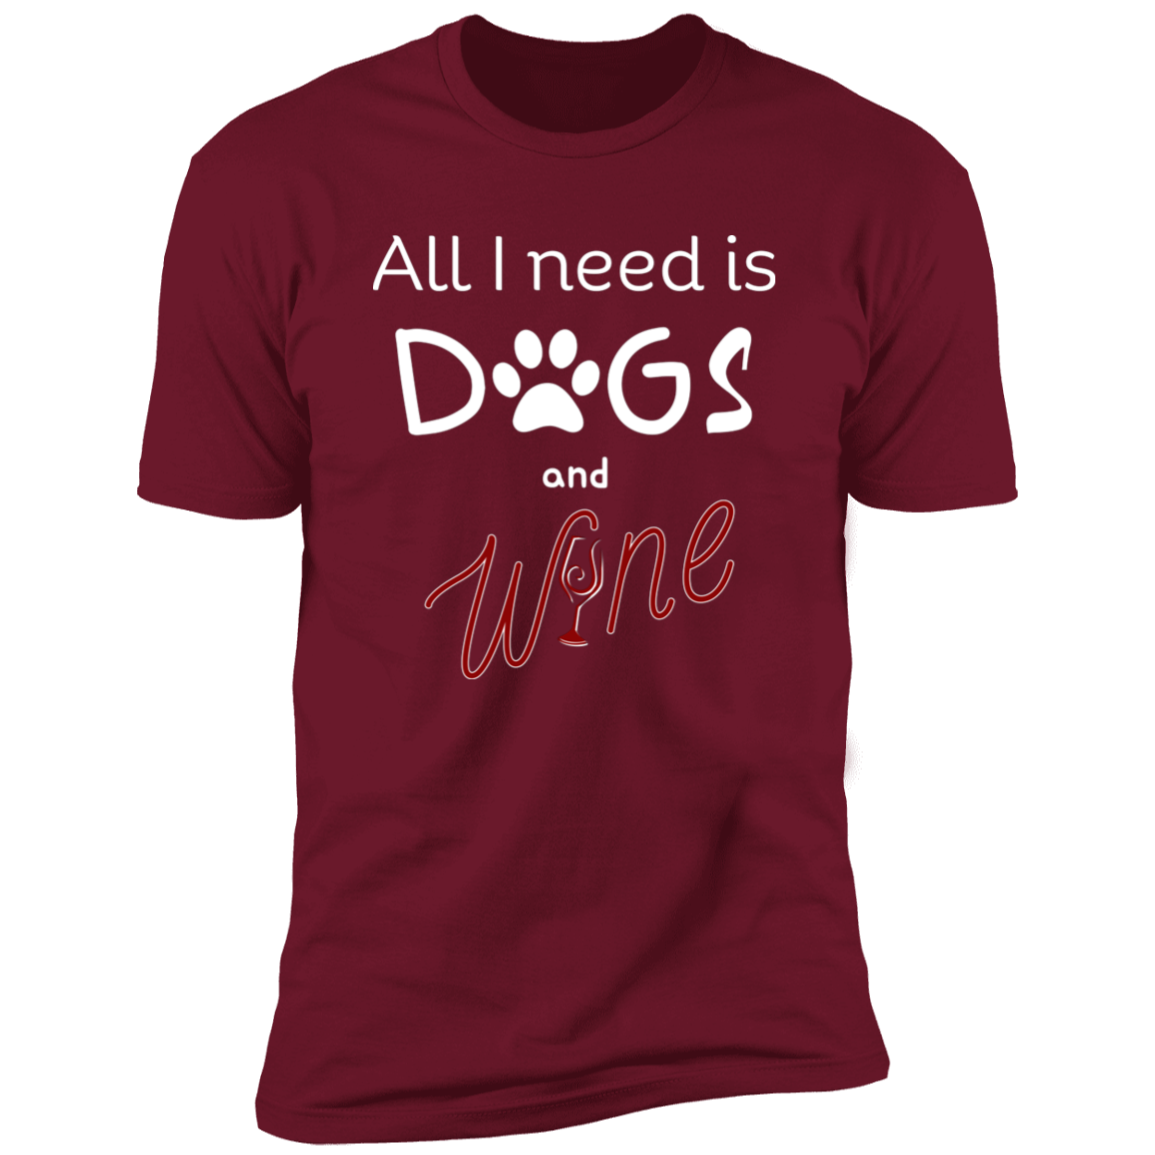 All I Need is Dogs and Wine T-shirt, Dog Shirt for humans, in cardinal red